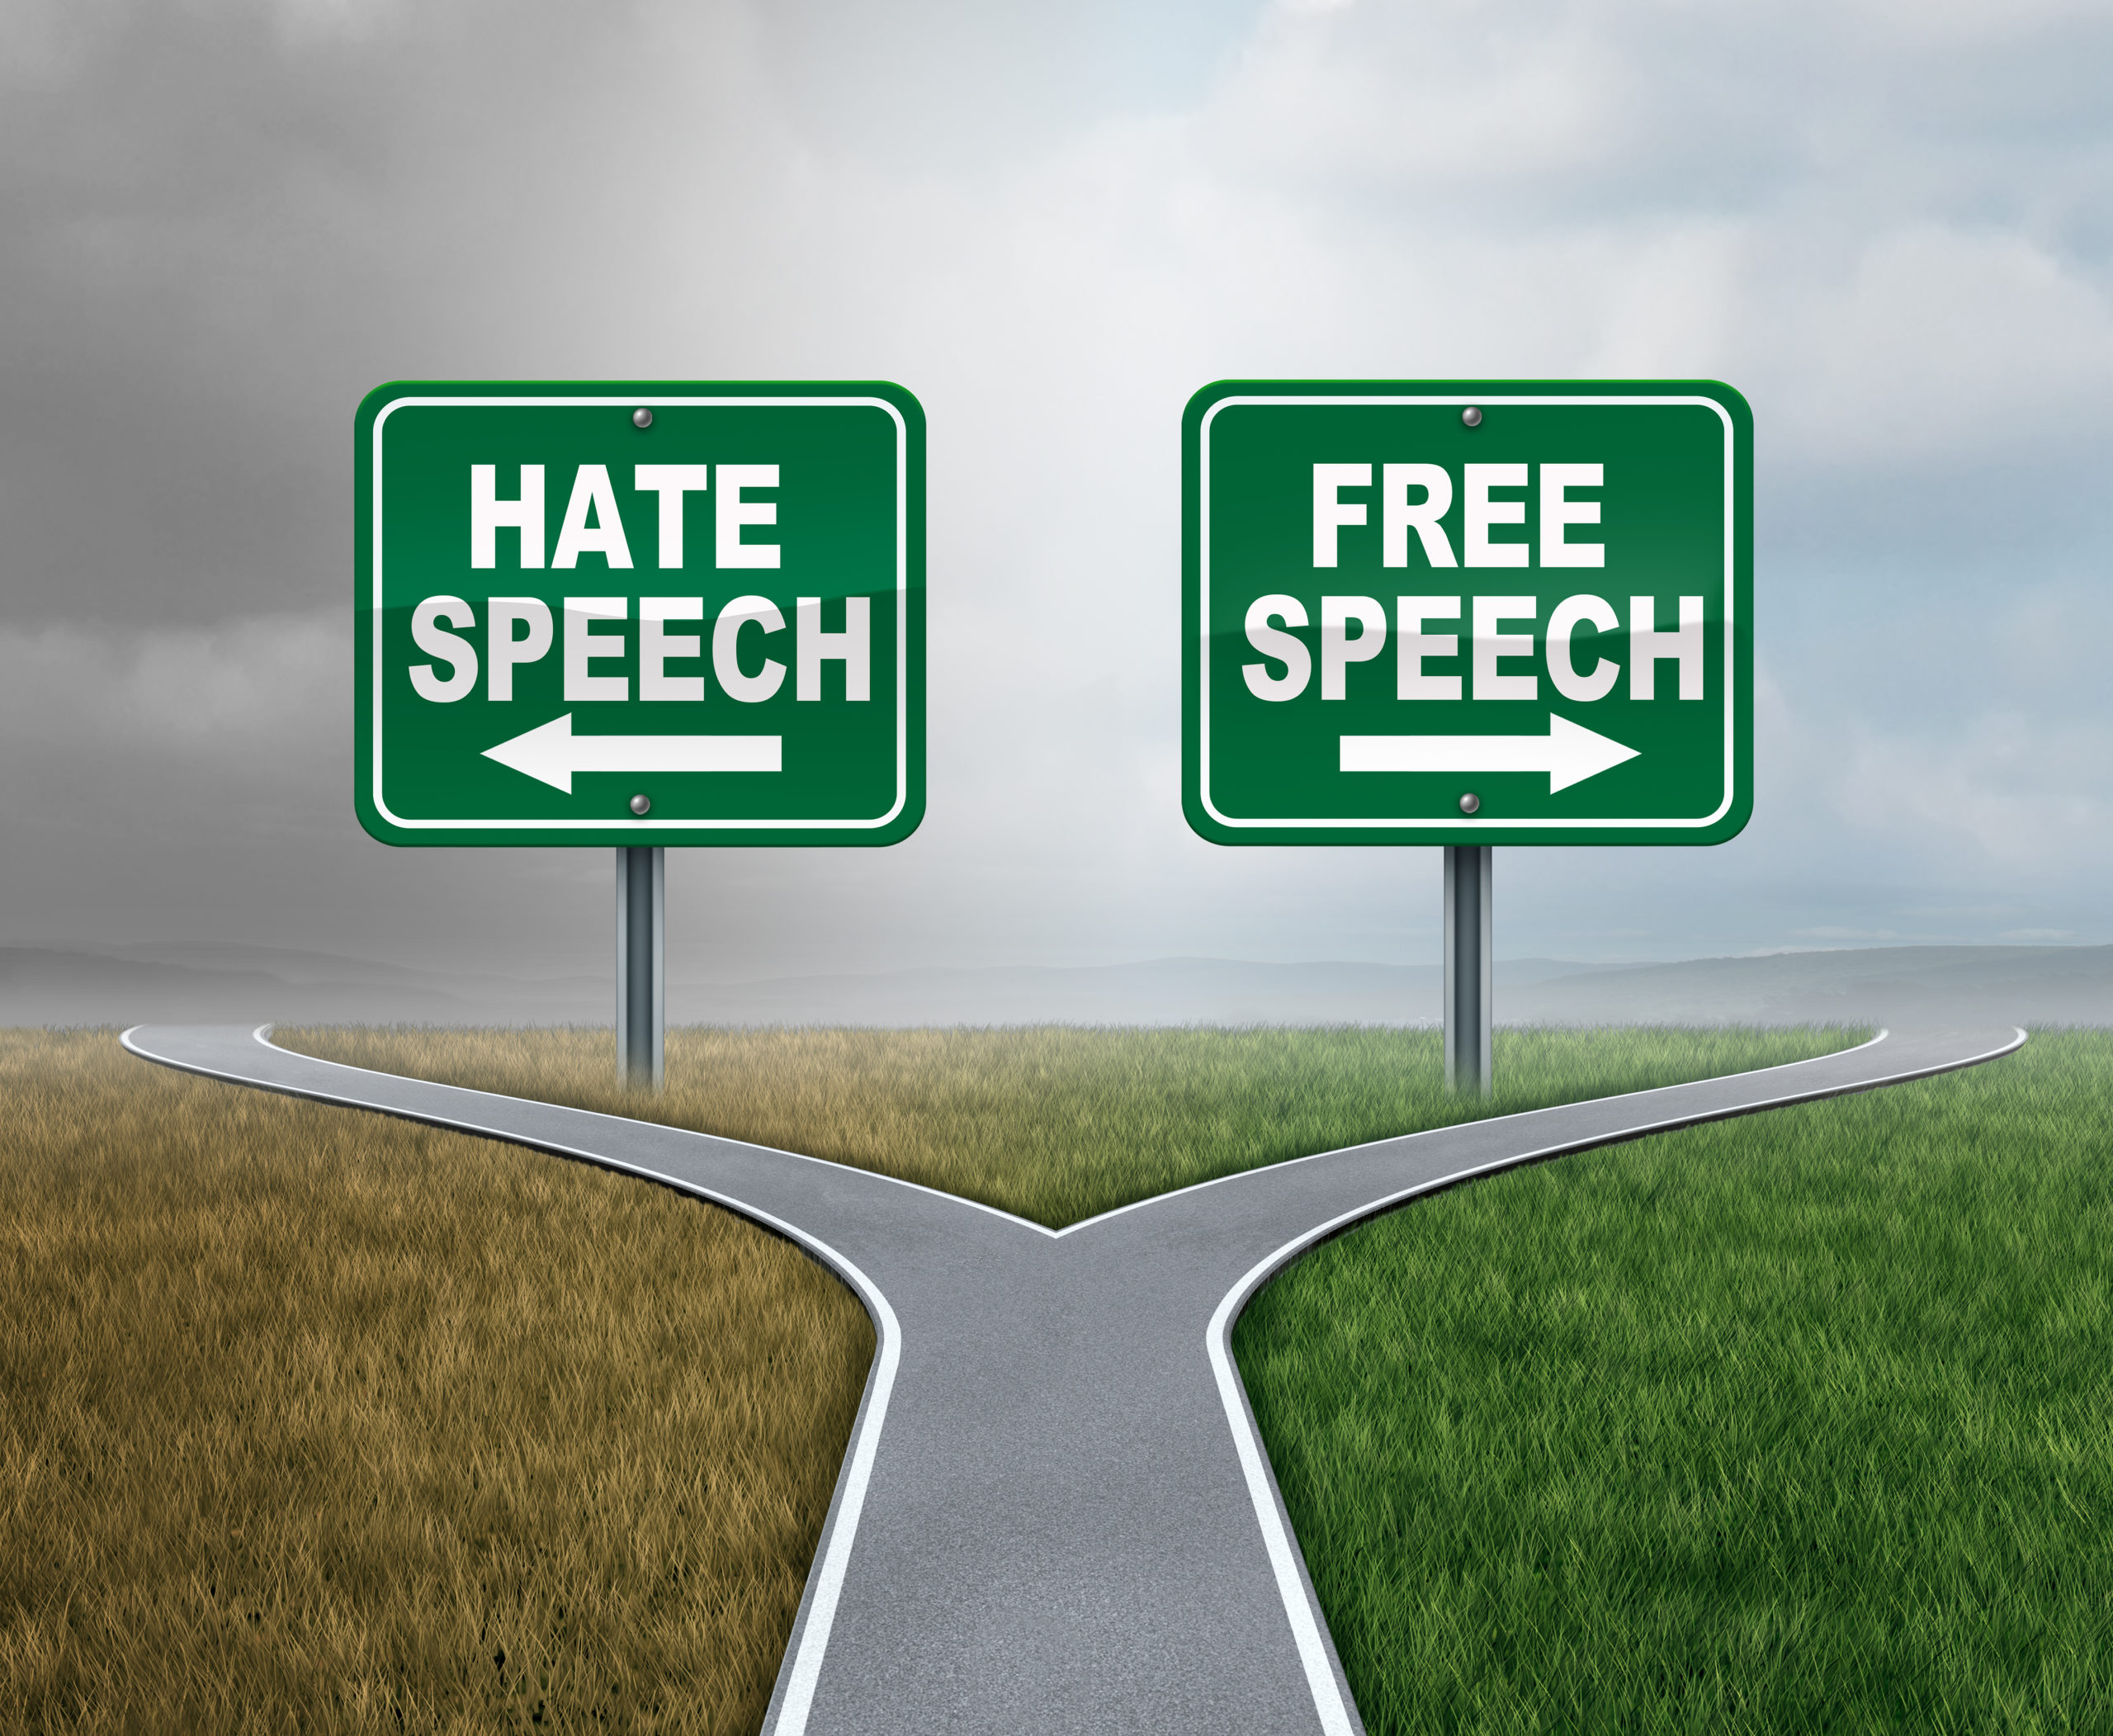 “EU must find right balance between free speech and responsibility”